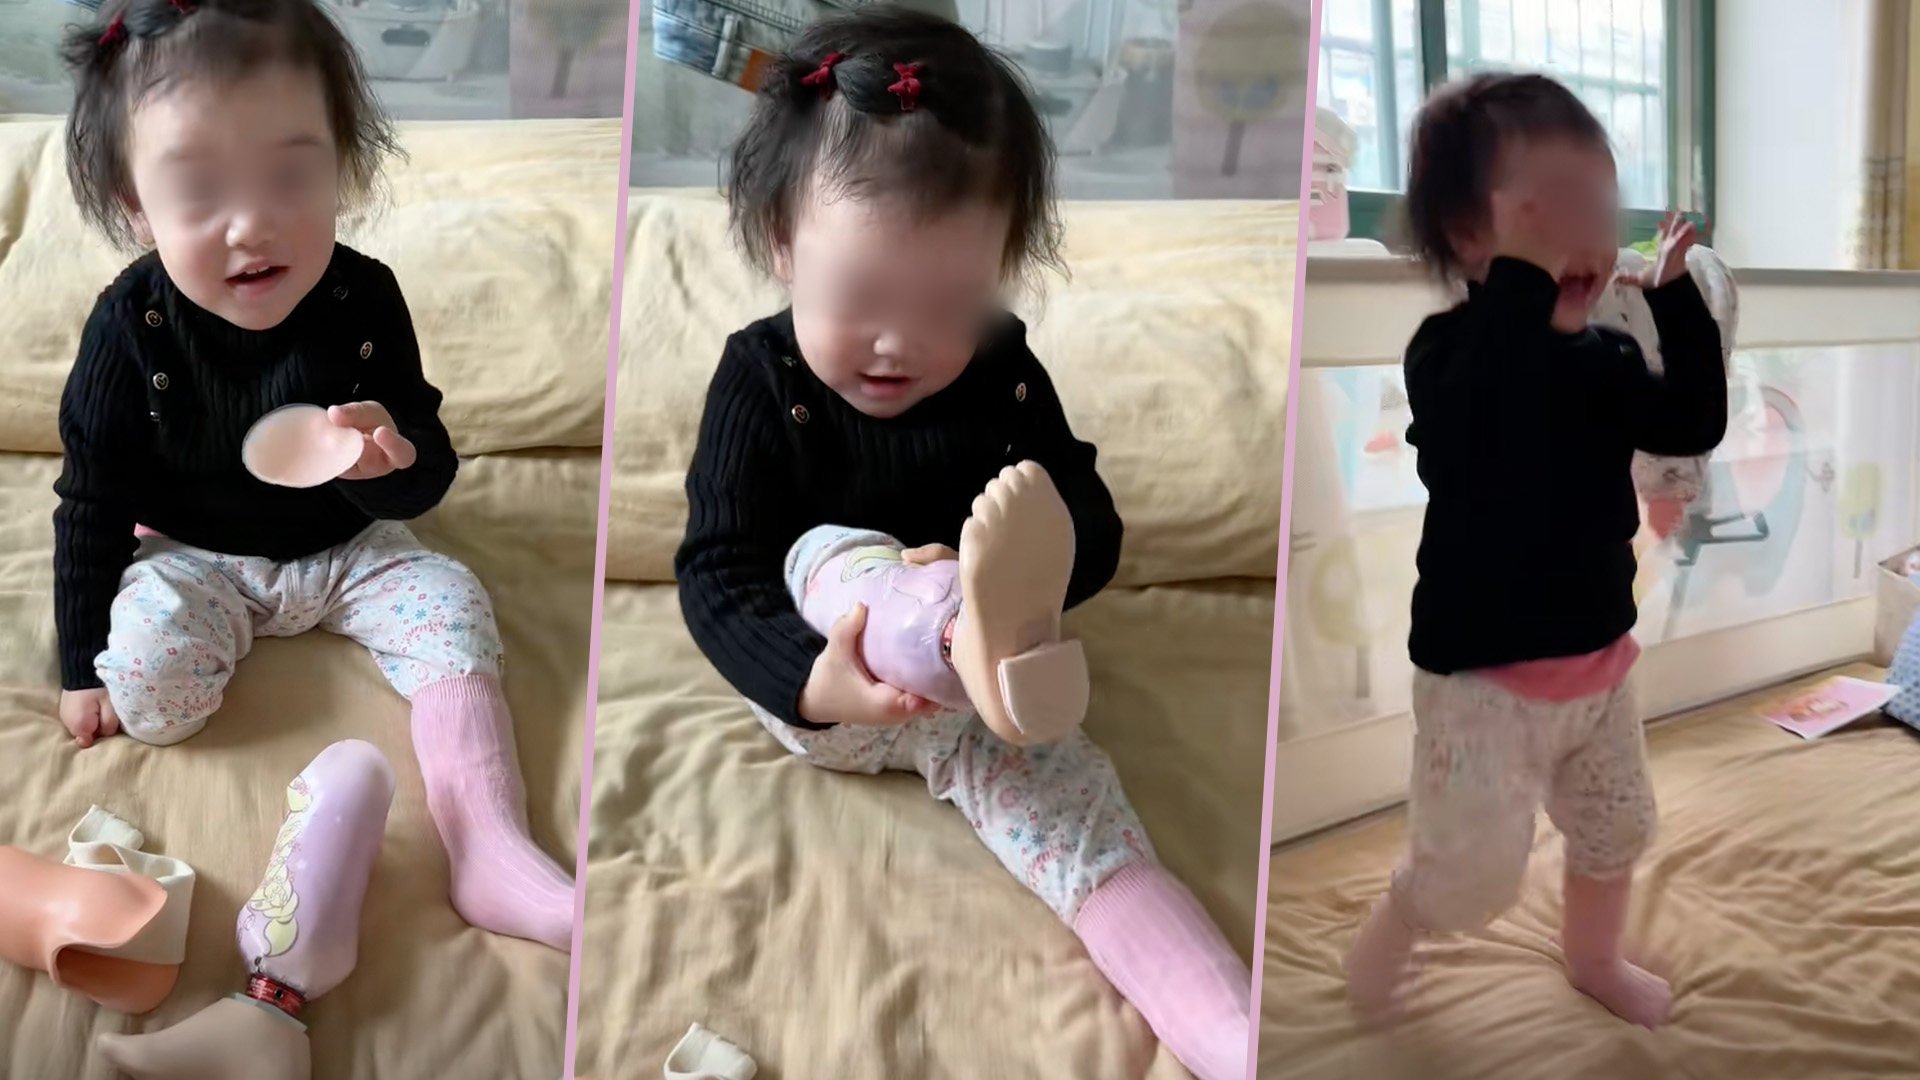 A brave one-legged toddler in China has captivated mainland social media in a video in which she successfully puts on her own prosthetic limb for the first time. Photo: SCMP composite/Douyin